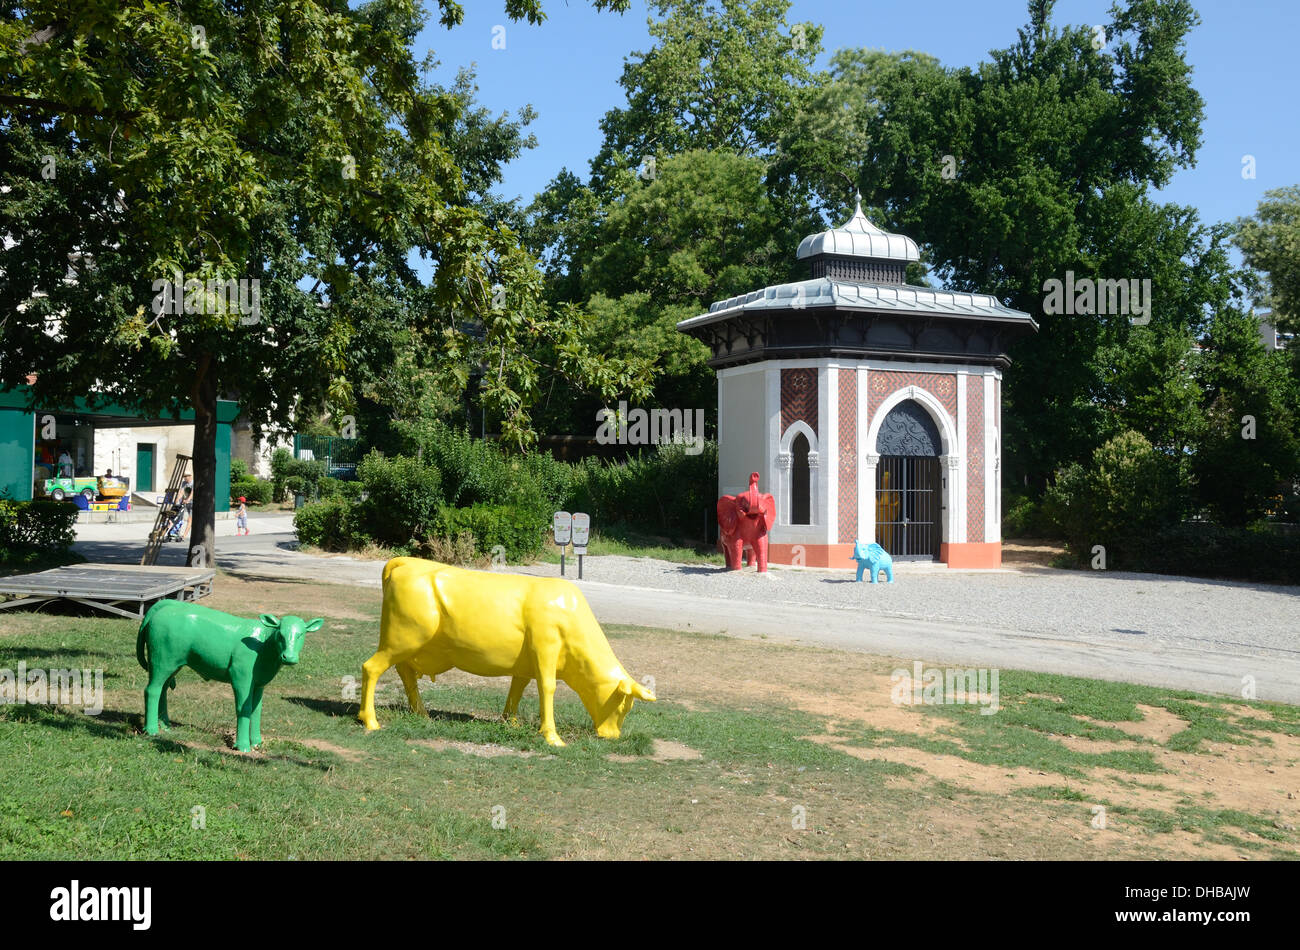 Oriental-Style or Mughal-Style Elephant House & Plastic Resin Animals at Marseille Funny Zoo Palais Longchamp Gardens Marseille France Stock Photo